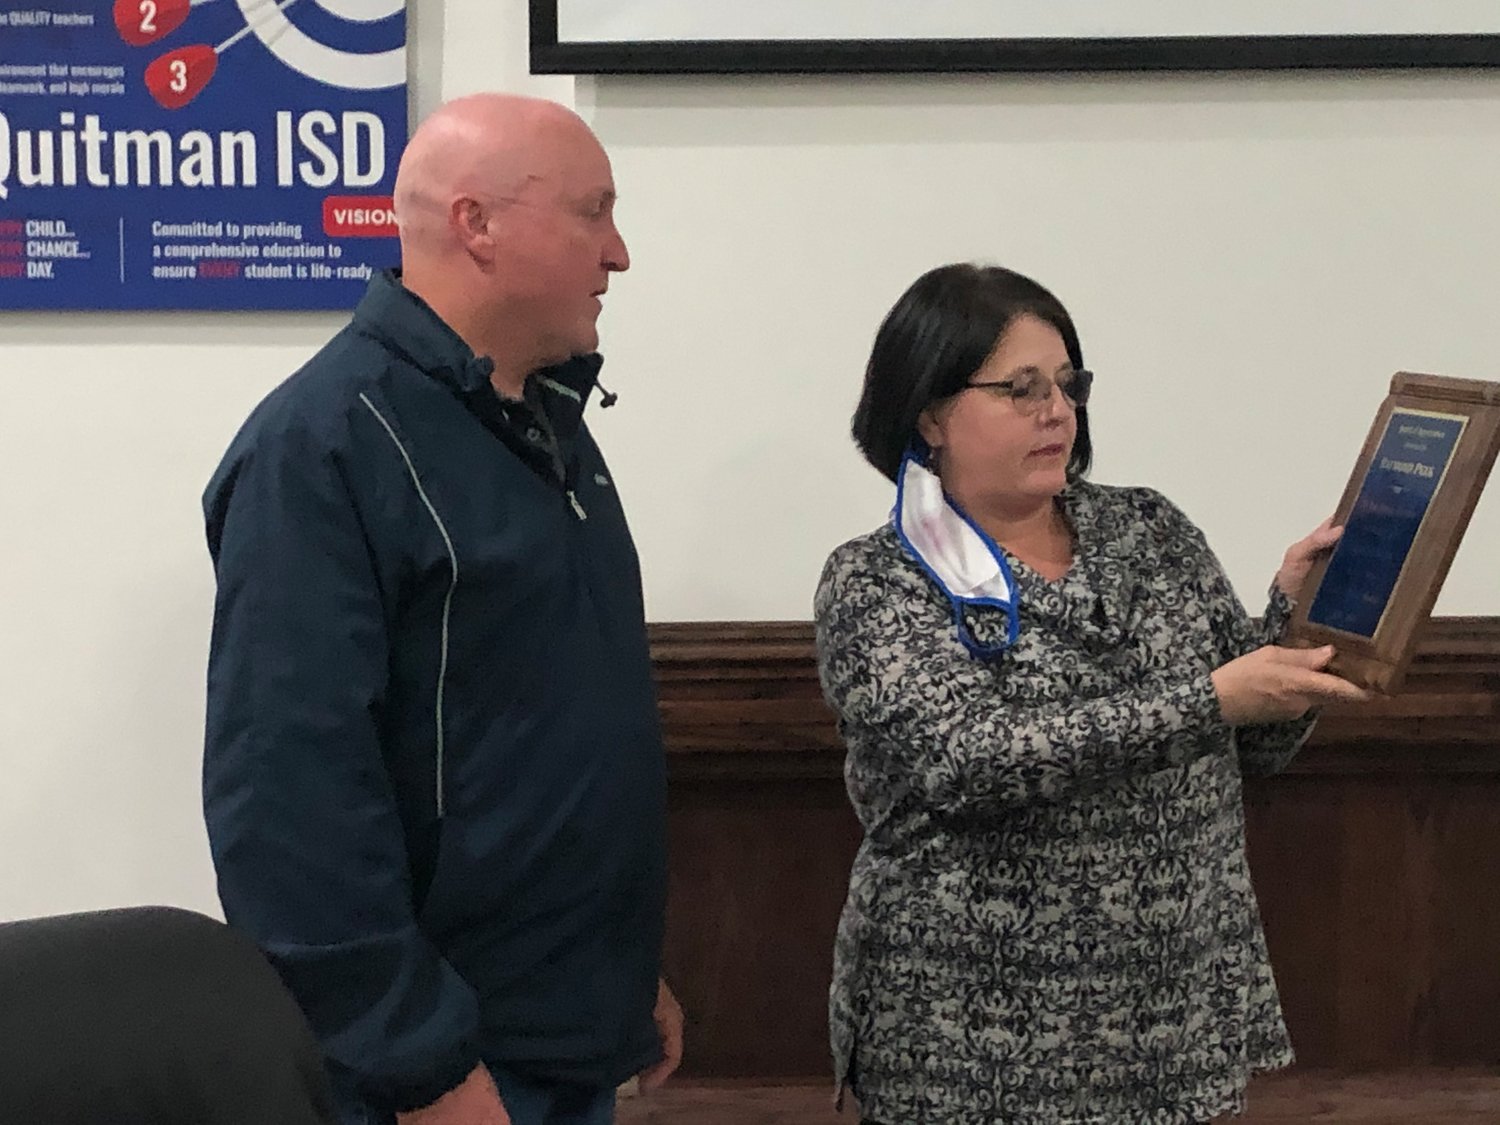 Outgoing board member Raymond Peek receives a plaque from Quitman ISD Superintendent Rhonda Turner honoring him for his years of service to the district.